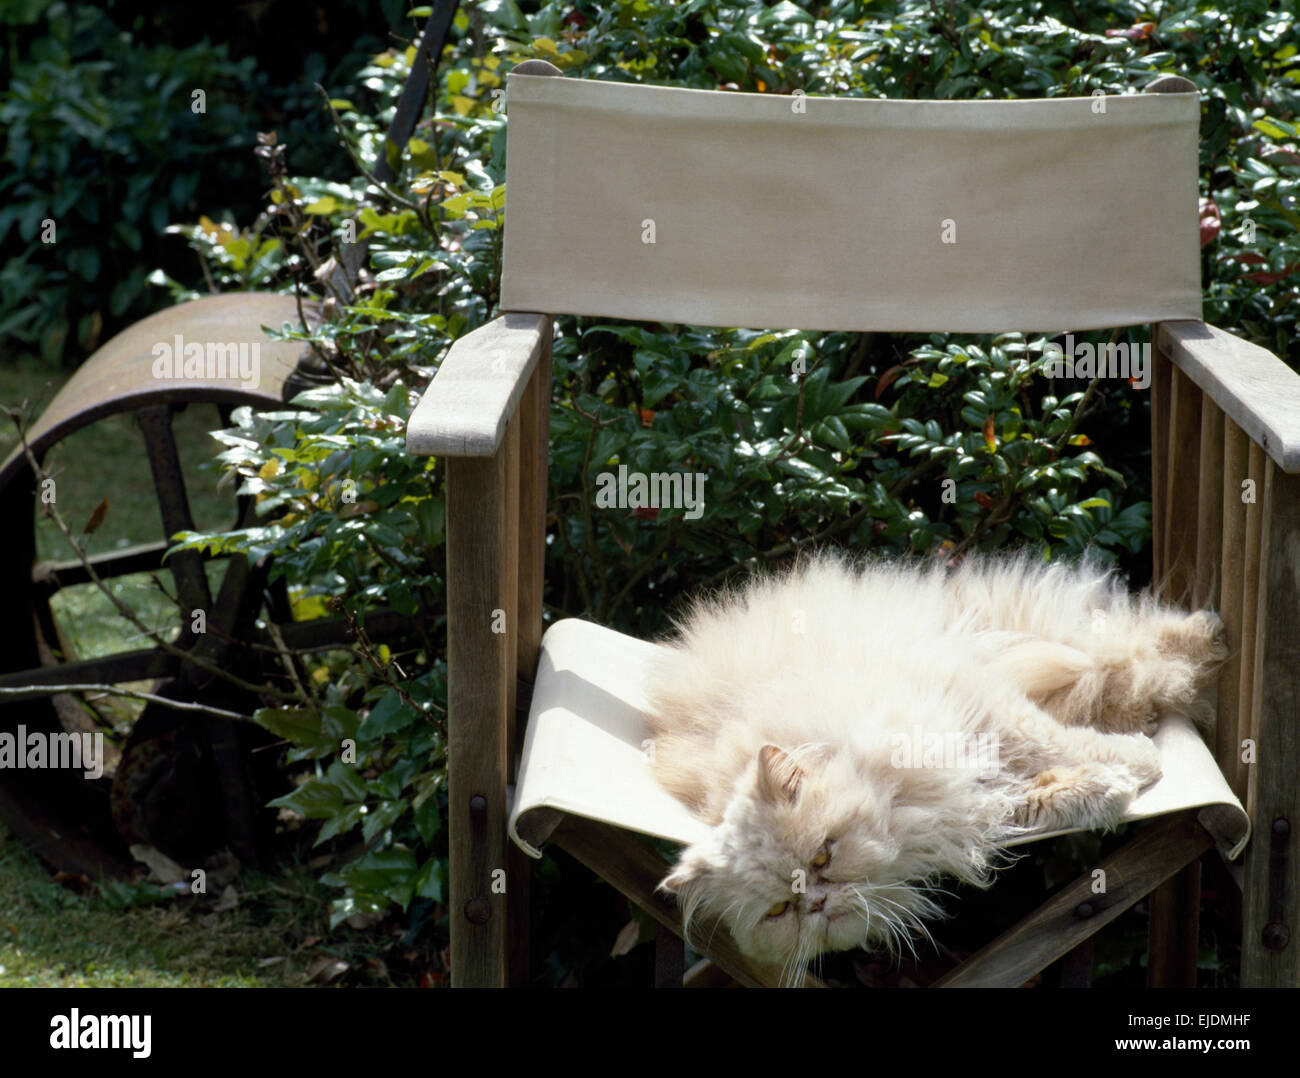 Close-up of a fluffy white cat lying on a director's chair in the garden Stock Photo